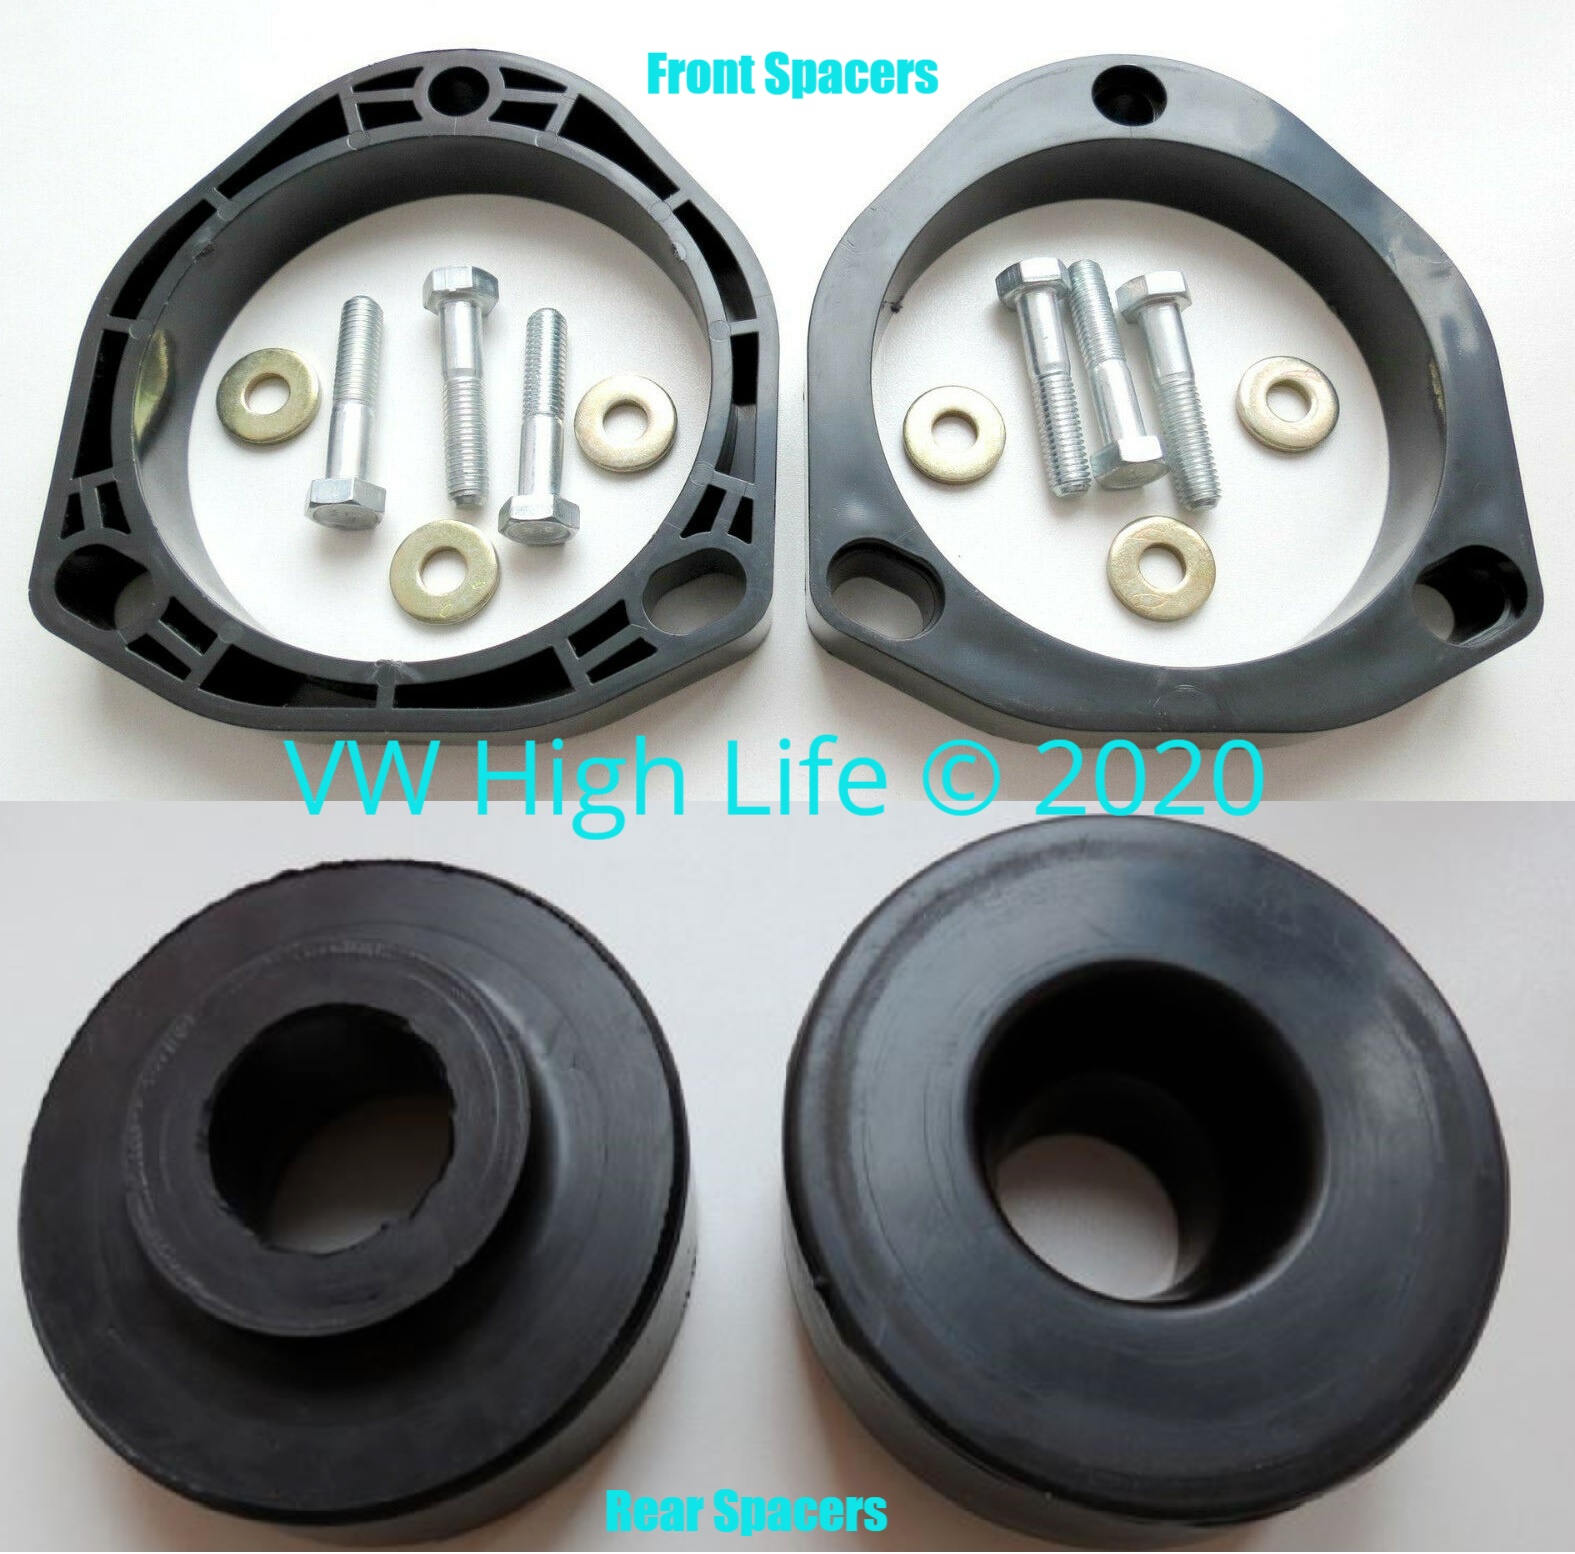 The Stage 1 and 2 Lift Kits use this custom made spacer kit imported from Europe.